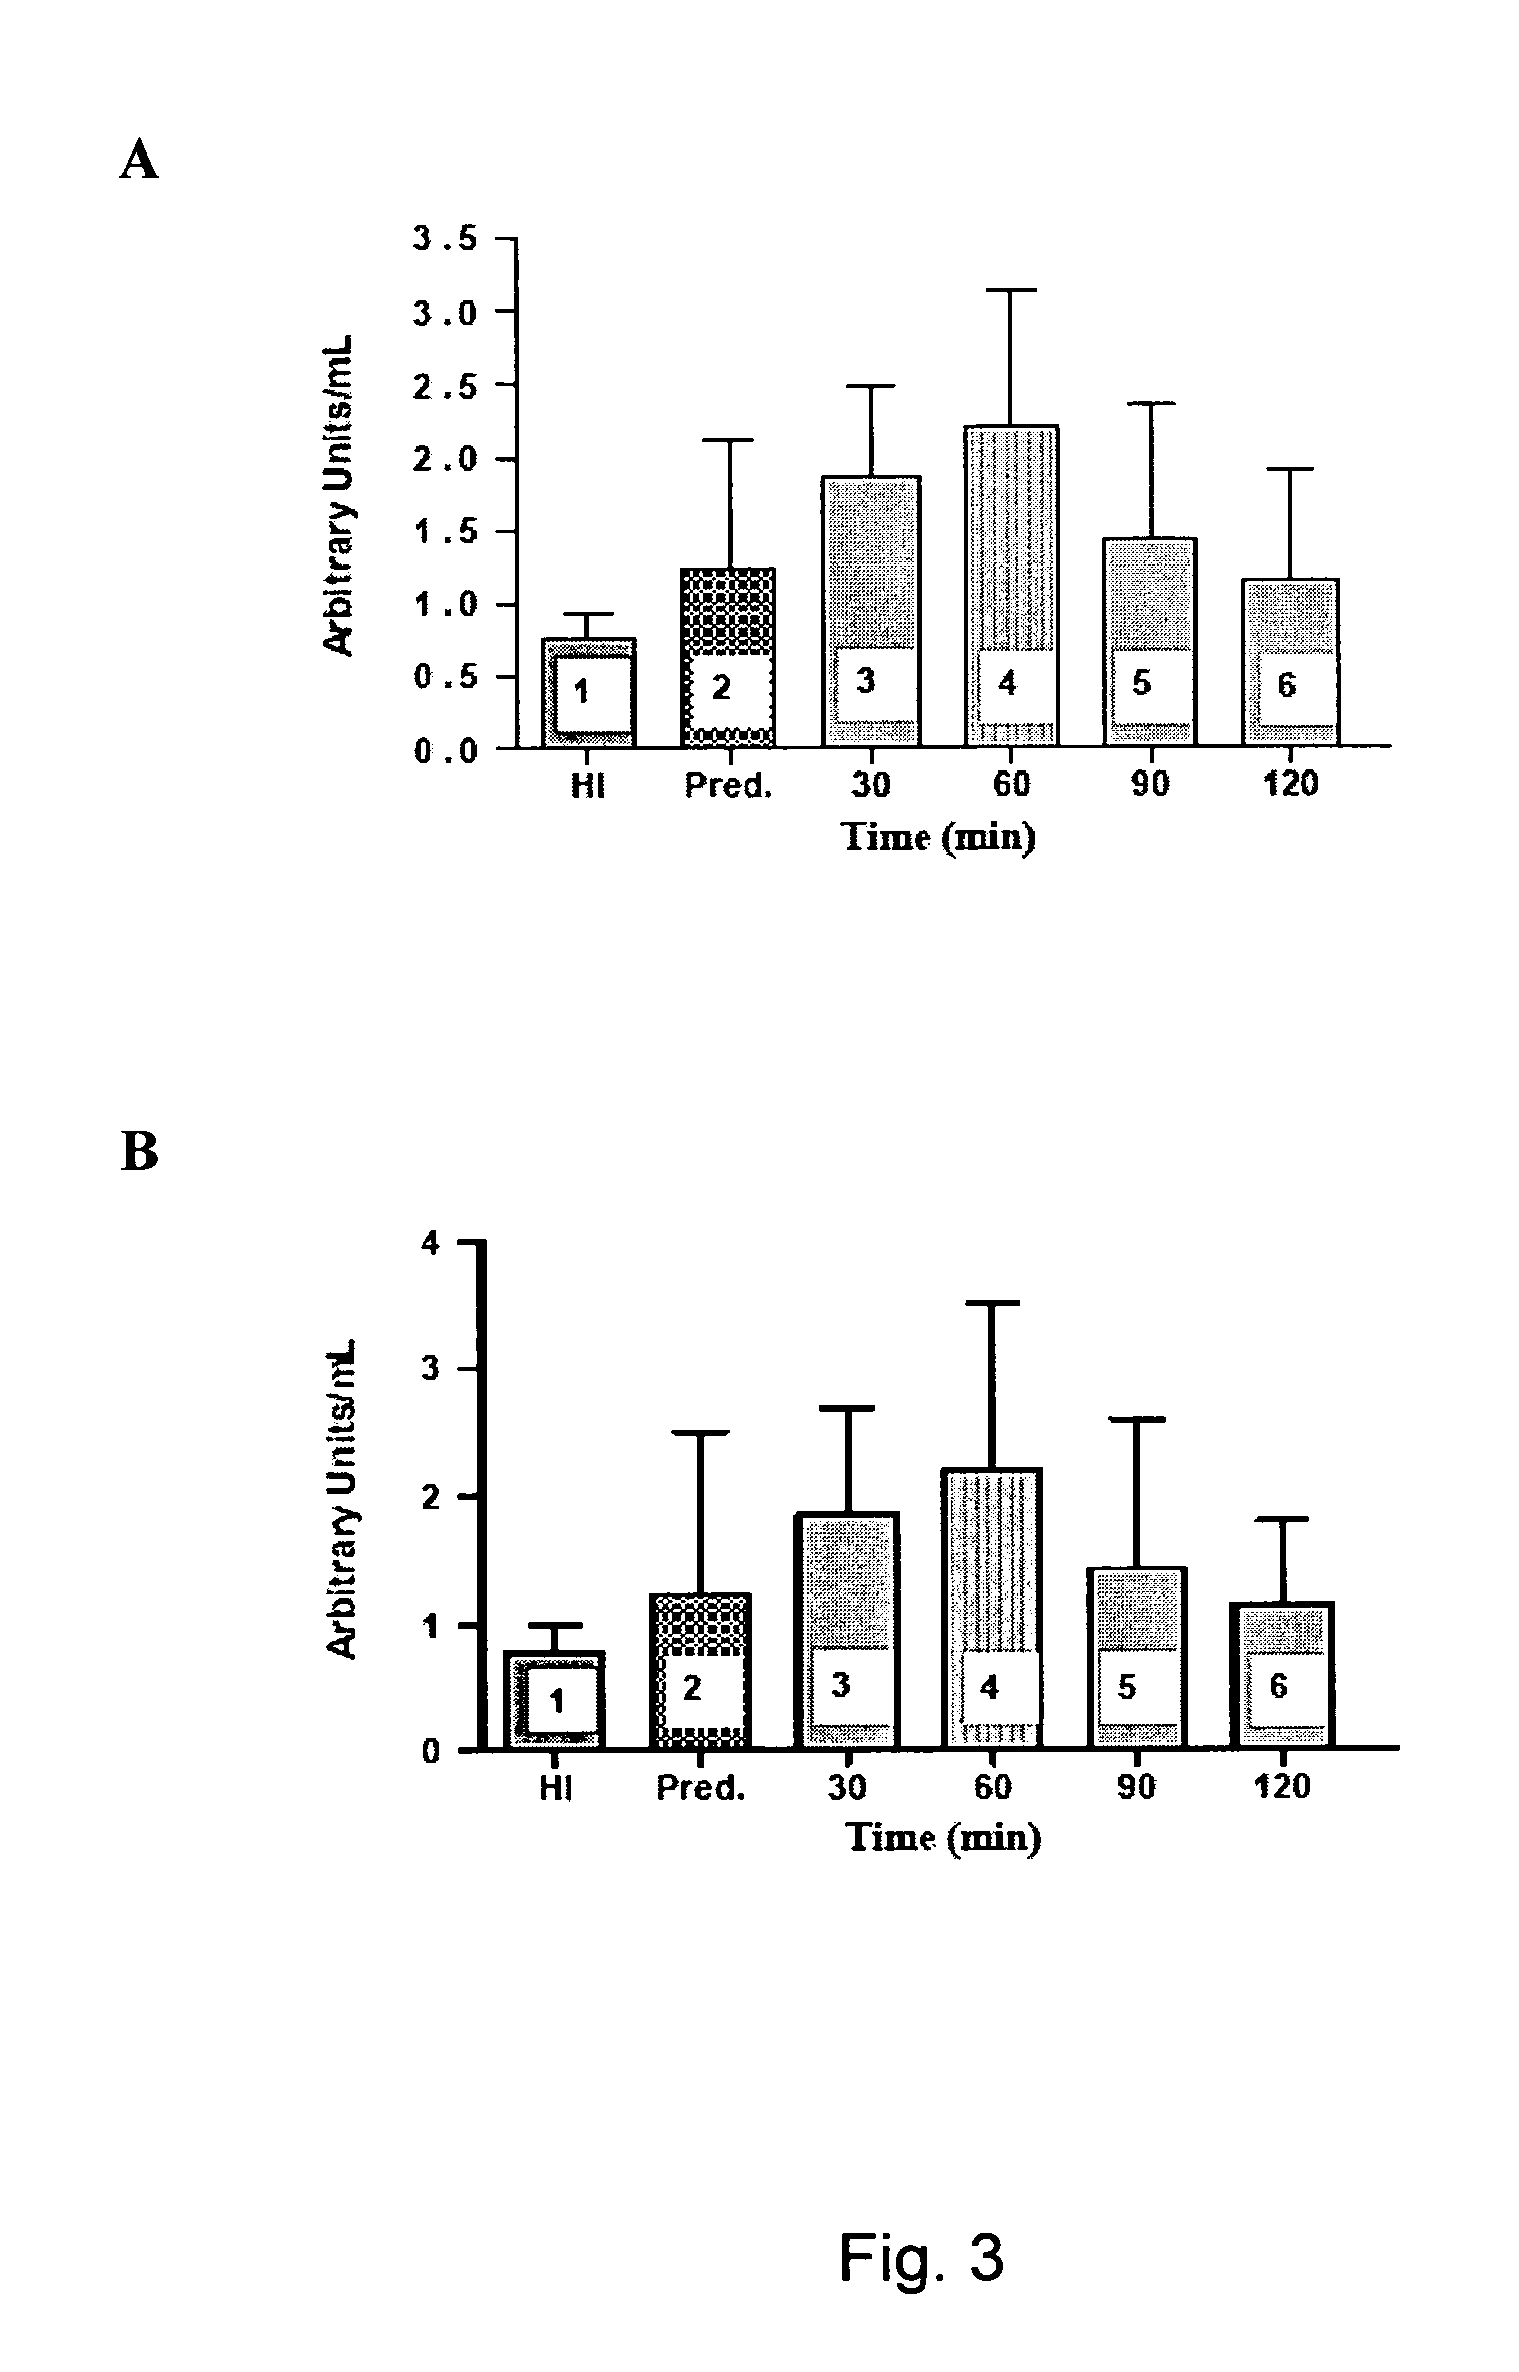 Method of inhibiting biomaterial-induced procoagulant activity using complement inhibitors